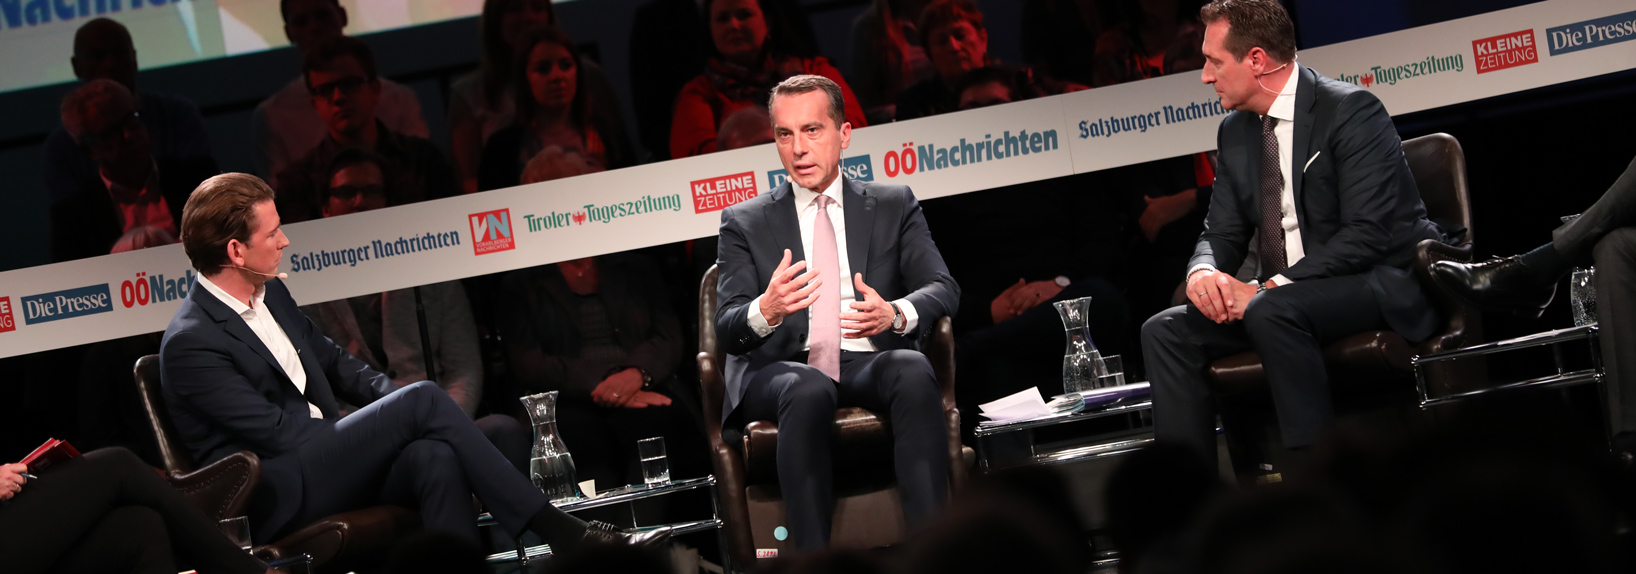 Discussion of Kurz, Kern and Strache